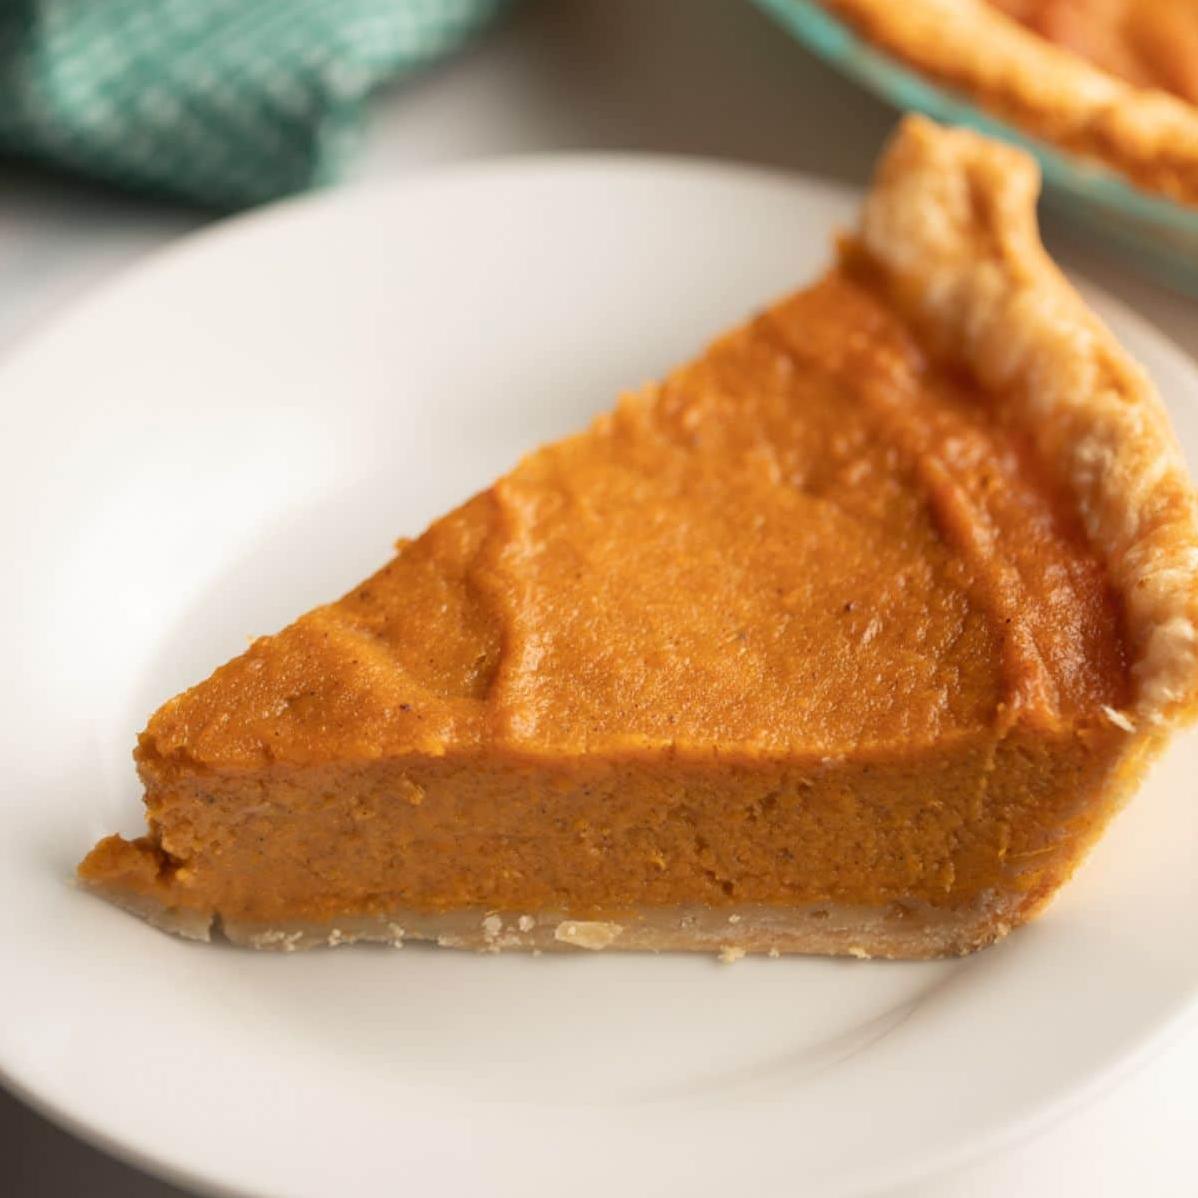  Delightful and delicious, this Southern Sweet Potato Pie is sure to become a family favorite.